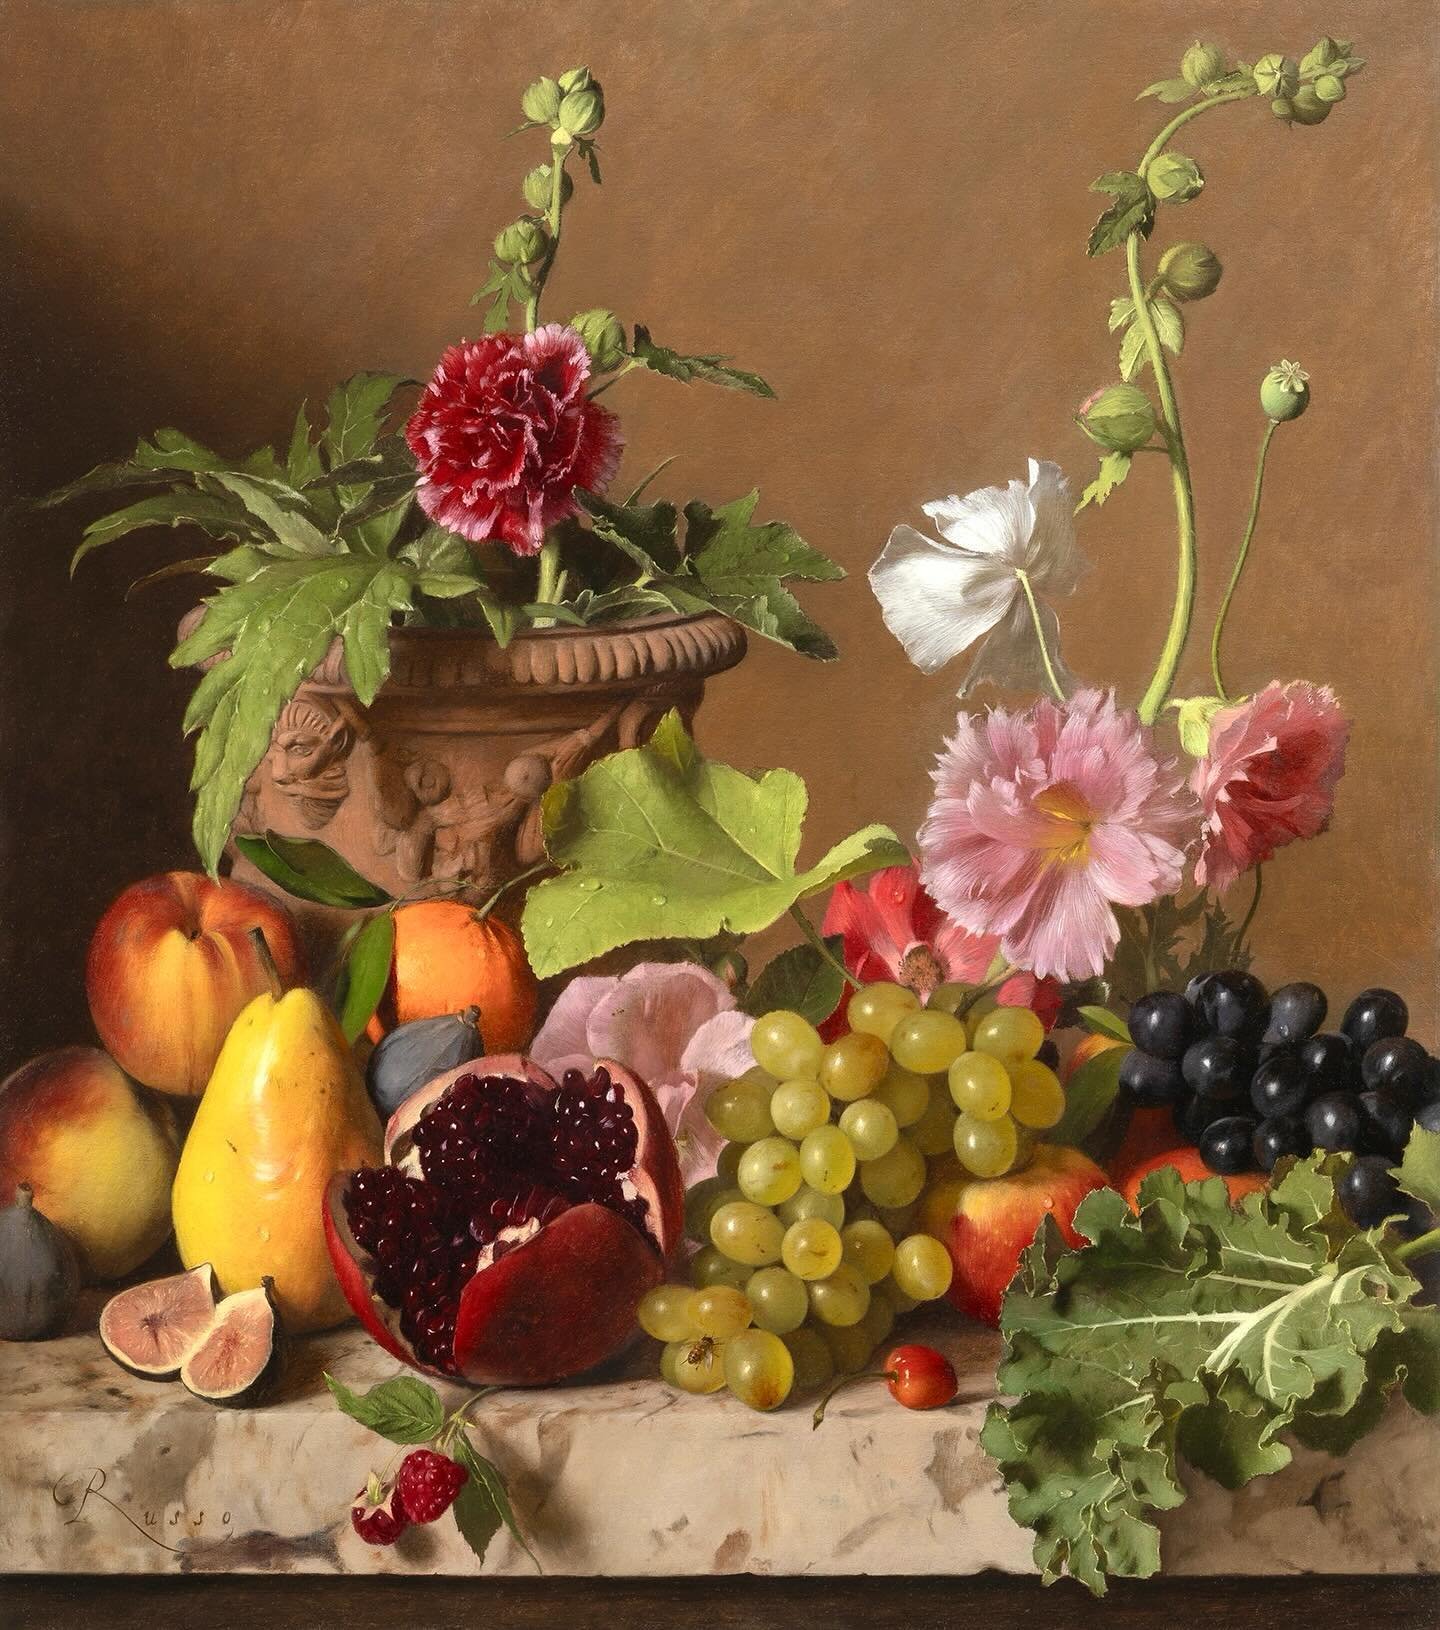 &lsquo;Summer Allegory&rsquo; for Carlo&rsquo;s solo show &ldquo;Inherent Nature&rdquo; opening this Friday! This is one of four larger, complex still lifes including a magnificent Vanitas painting. 

#painting #stilllife #carlorusso